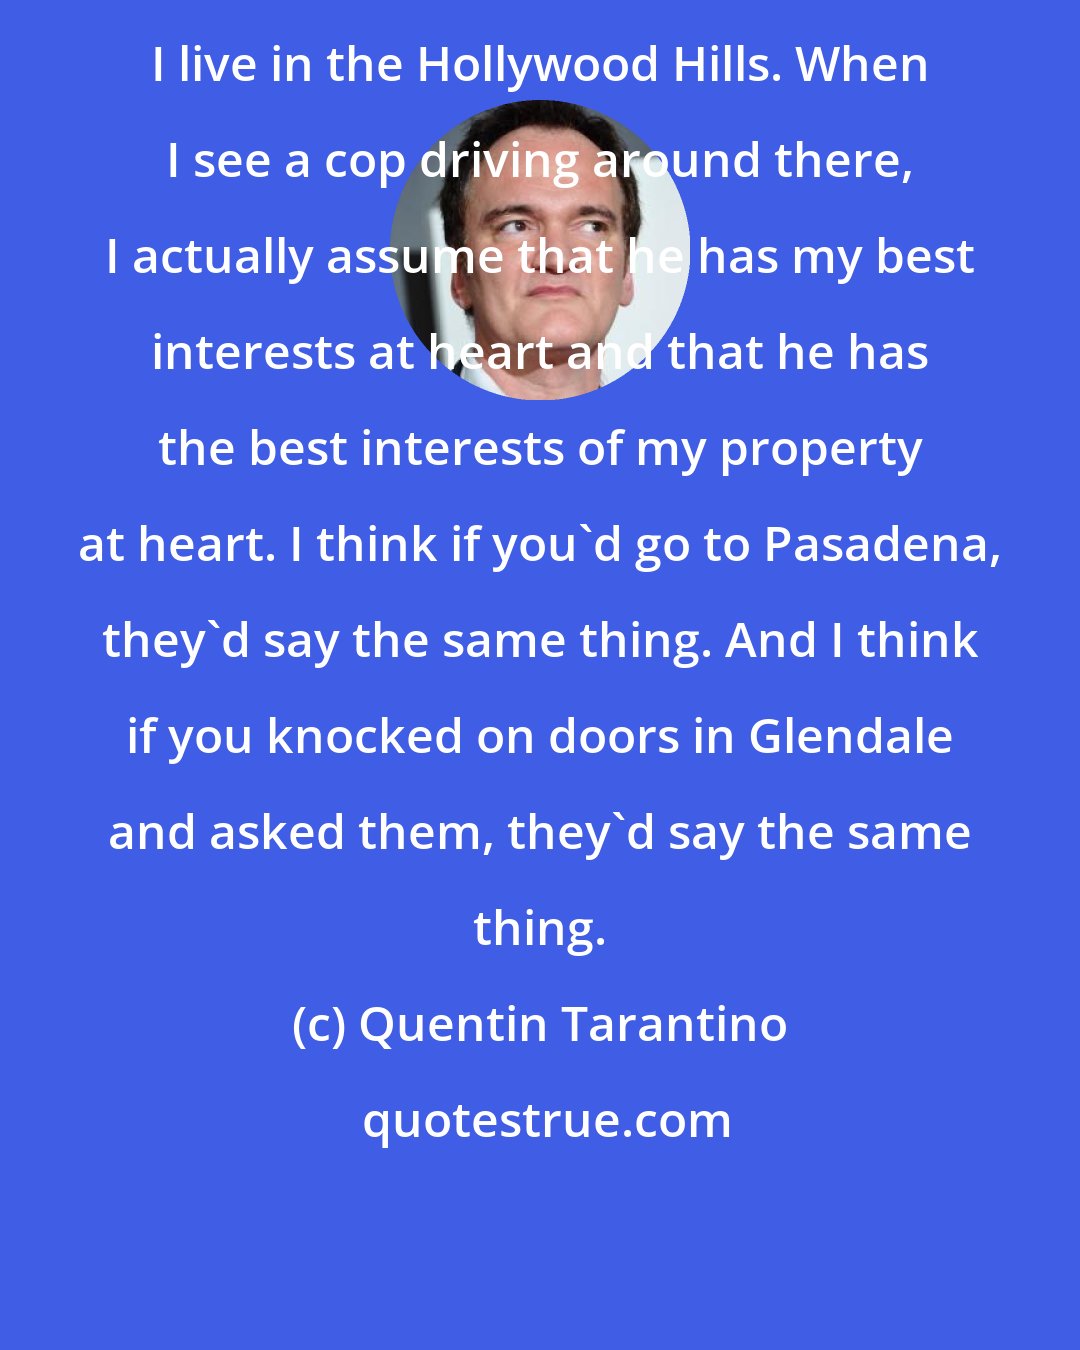 Quentin Tarantino: I live in the Hollywood Hills. When I see a cop driving around there, I actually assume that he has my best interests at heart and that he has the best interests of my property at heart. I think if you'd go to Pasadena, they'd say the same thing. And I think if you knocked on doors in Glendale and asked them, they'd say the same thing.